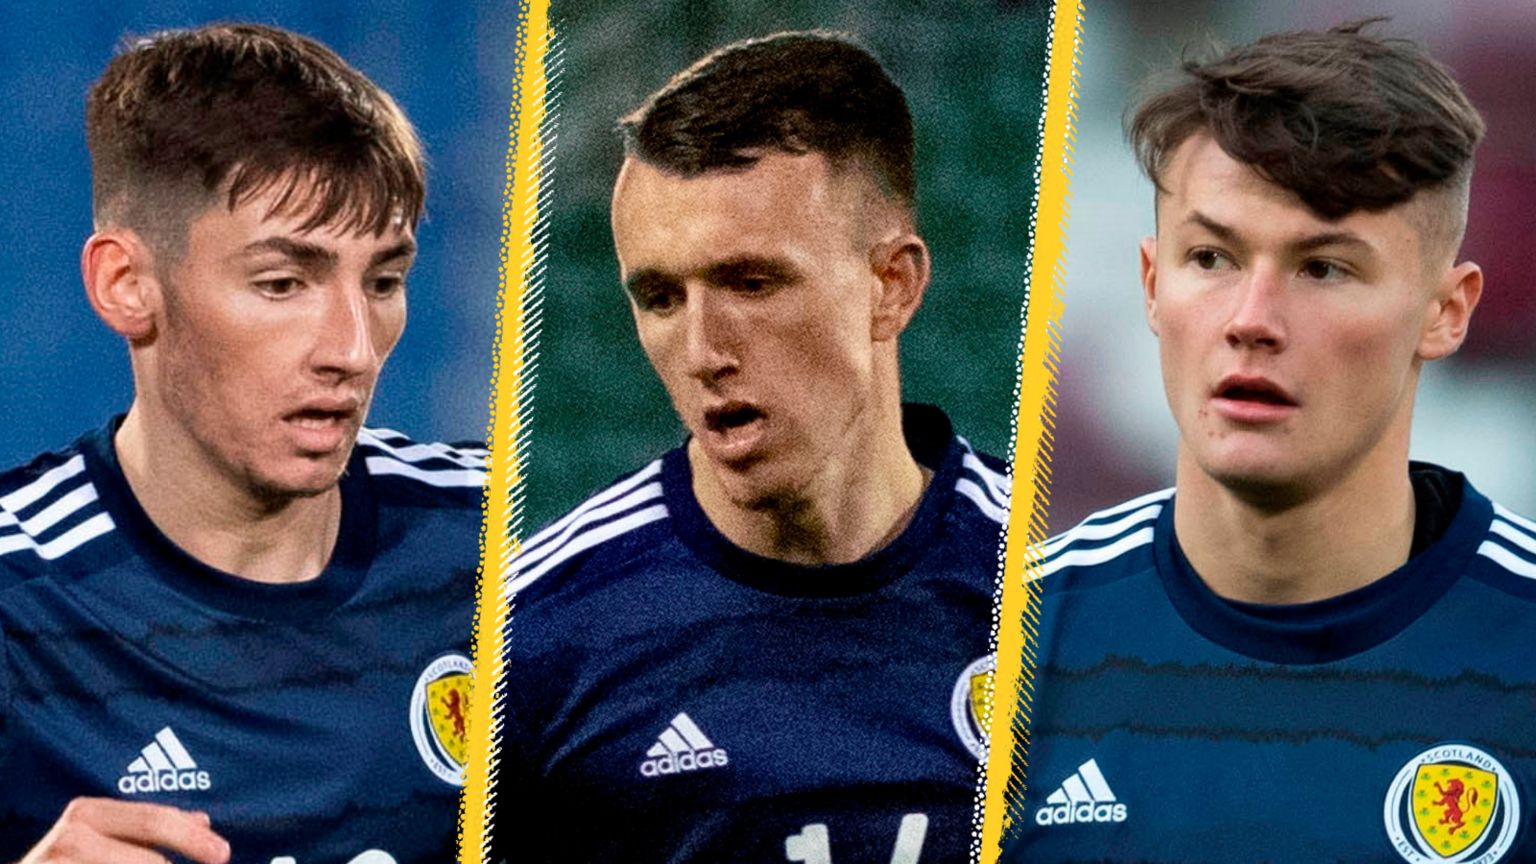 Billy Gilmour, David Turnbull and Nathan Patterson